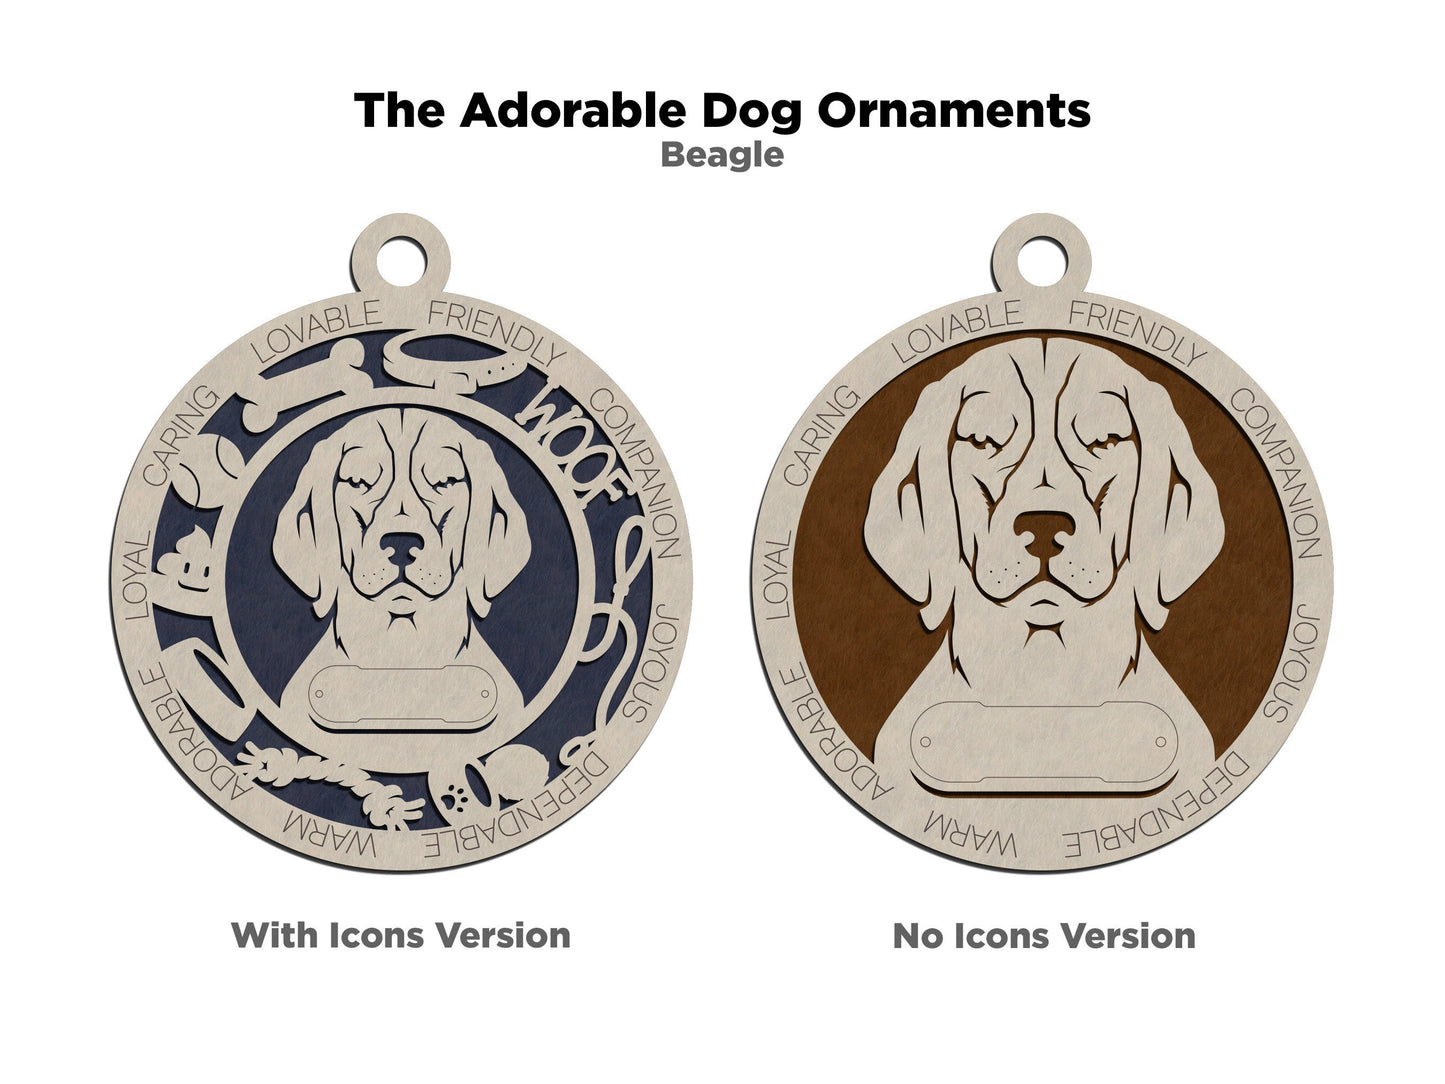 Beagle - Adorable Dog Ornaments - 2 Ornaments included - SVG, PDF, AI File Download - Sized for Glowforge